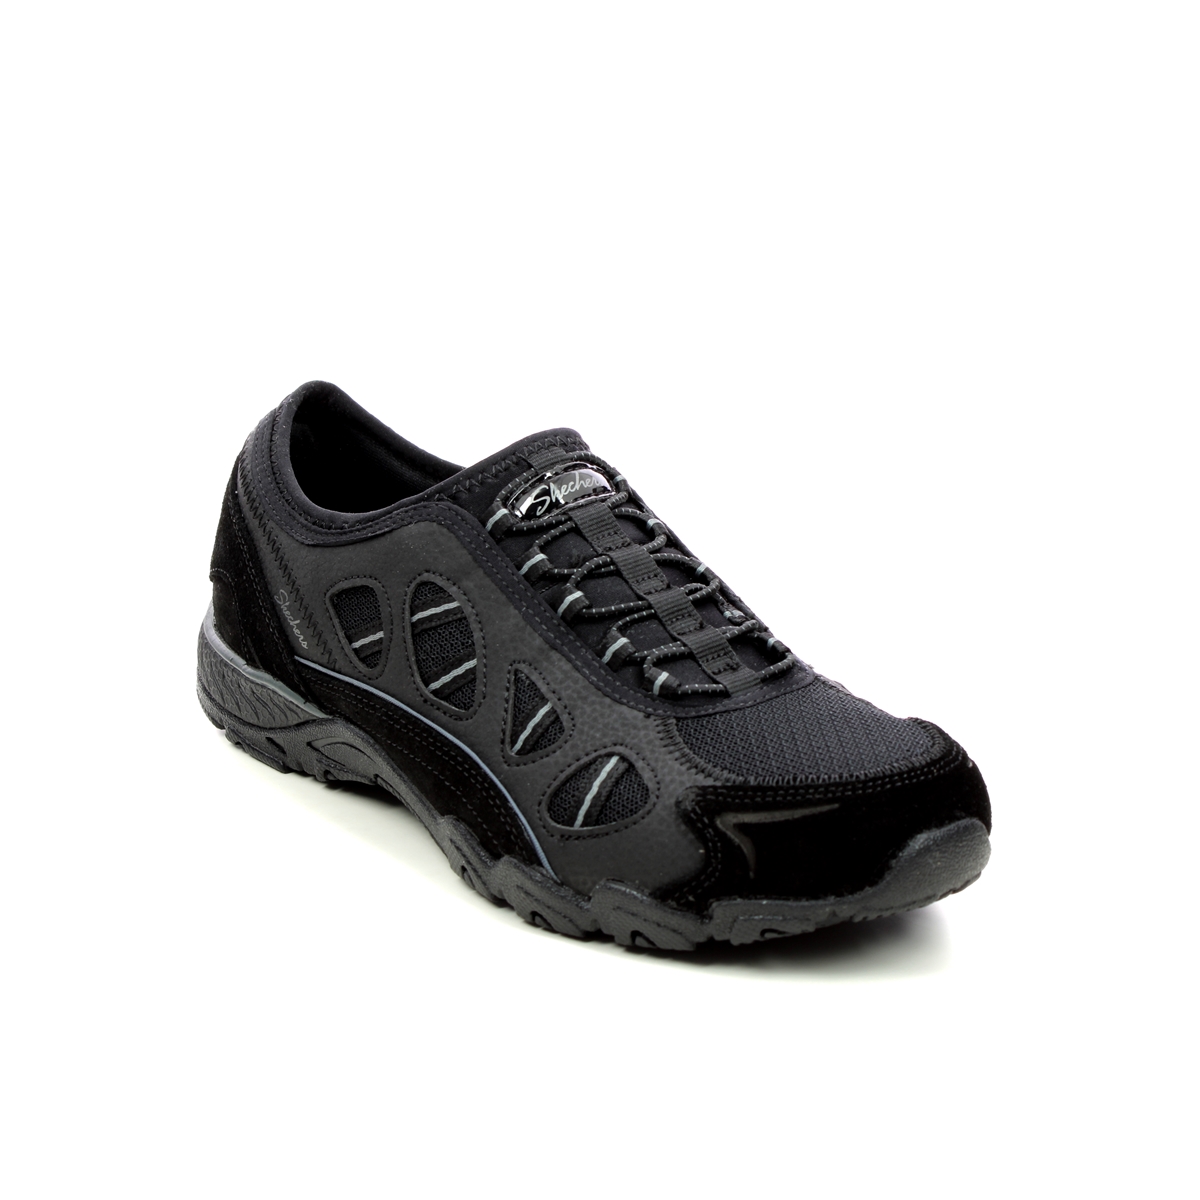 Skechers Hot Ticket 2 BKCC Black Charcoal Grey Womens trainers 100558 in a Plain Leather and Textile in Size 6